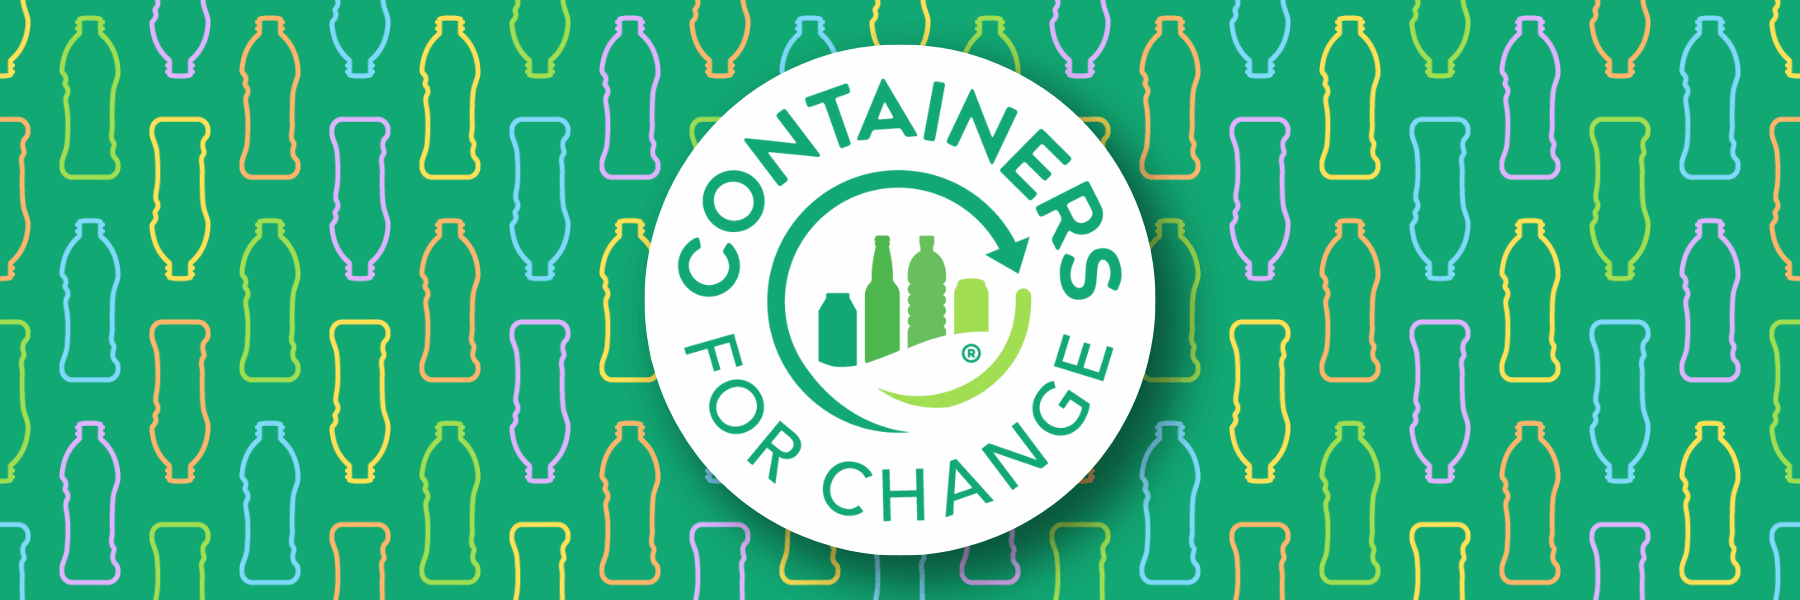 containers for change logo